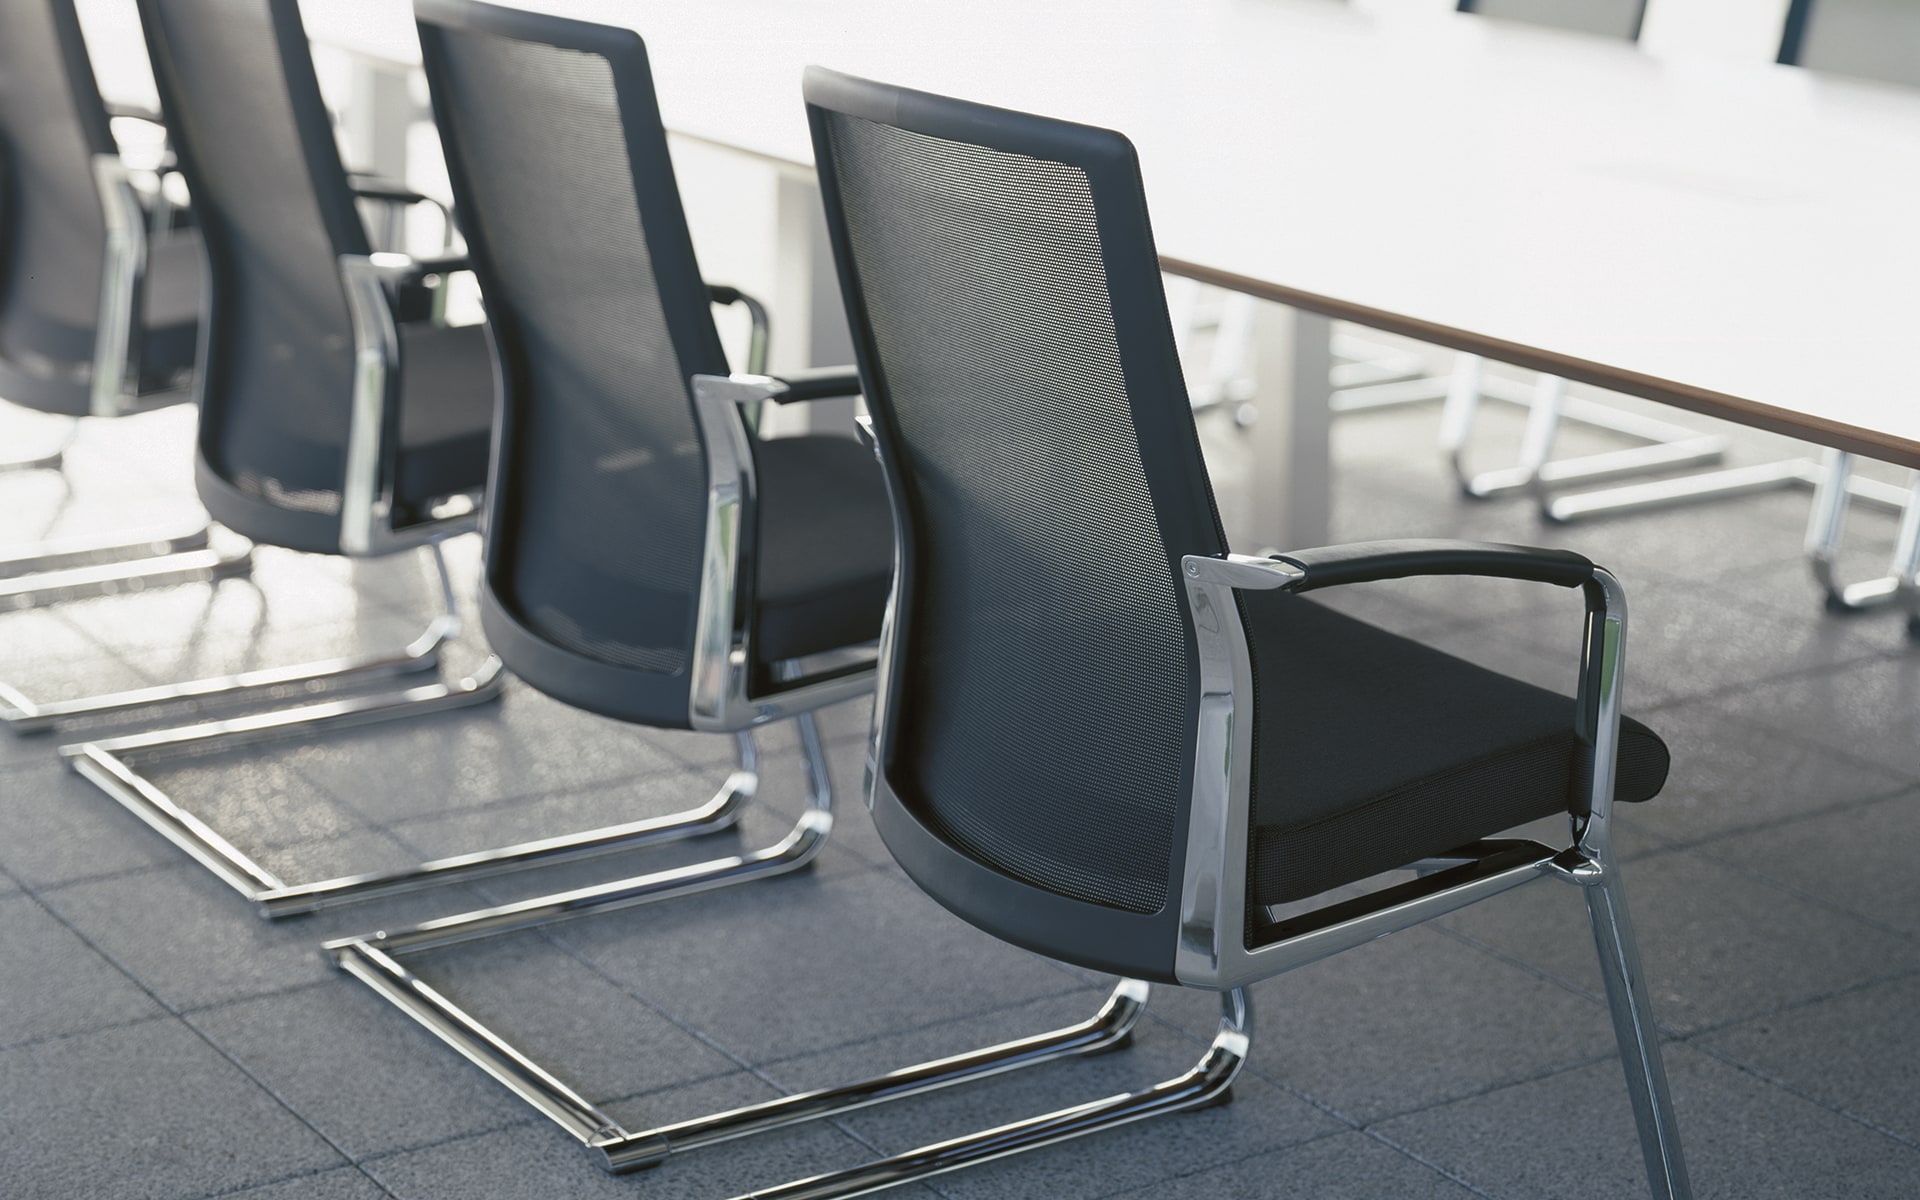 Close-up of black K+N Agenda conference chairs by ITO Design with mesh backrests